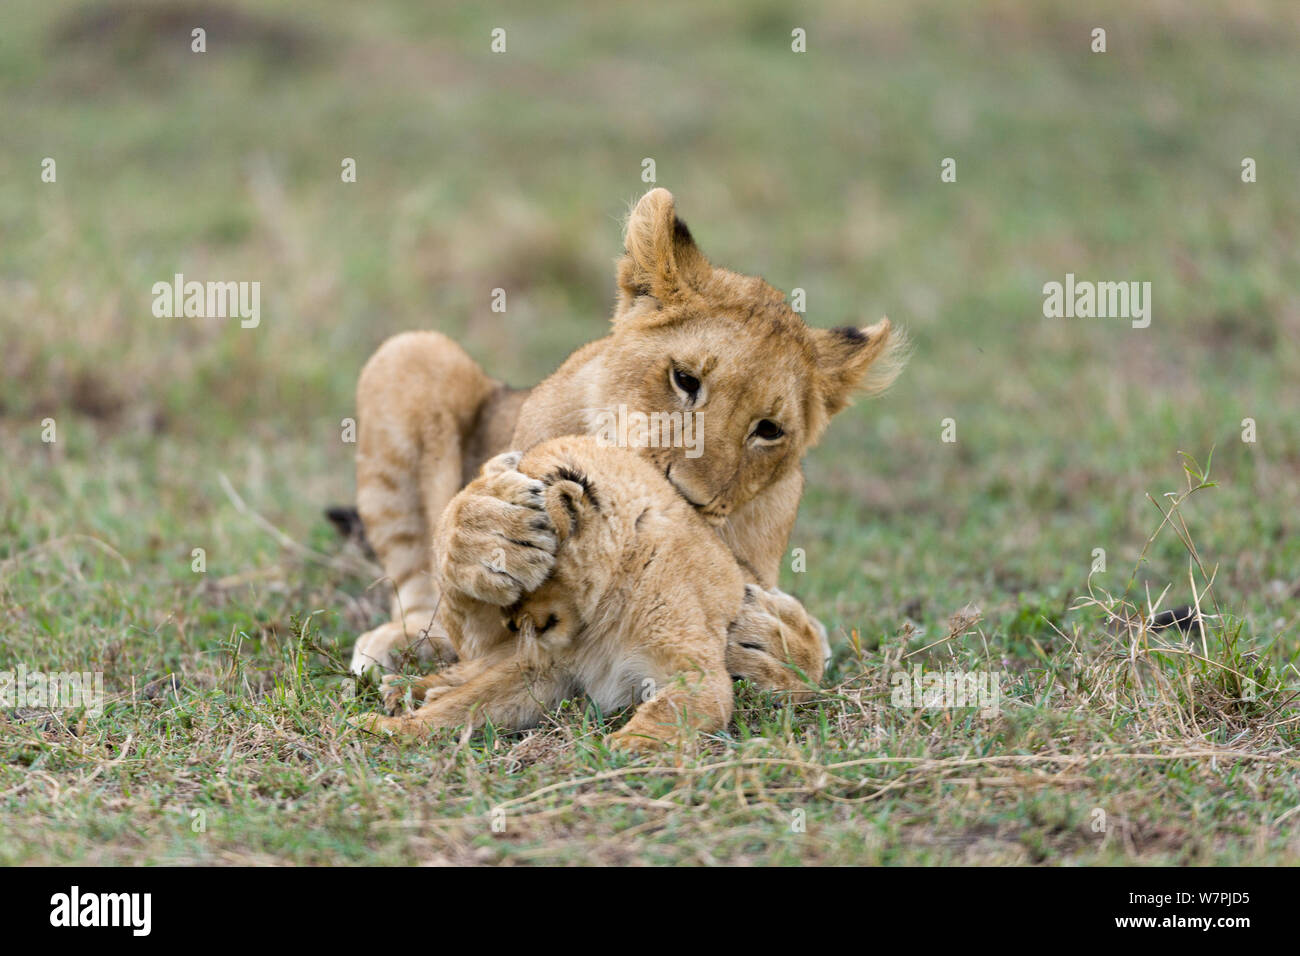 Lion (Panthera leo), older cub playing with a young one, Masai-Mara game reserve, Kenya Stock Photo